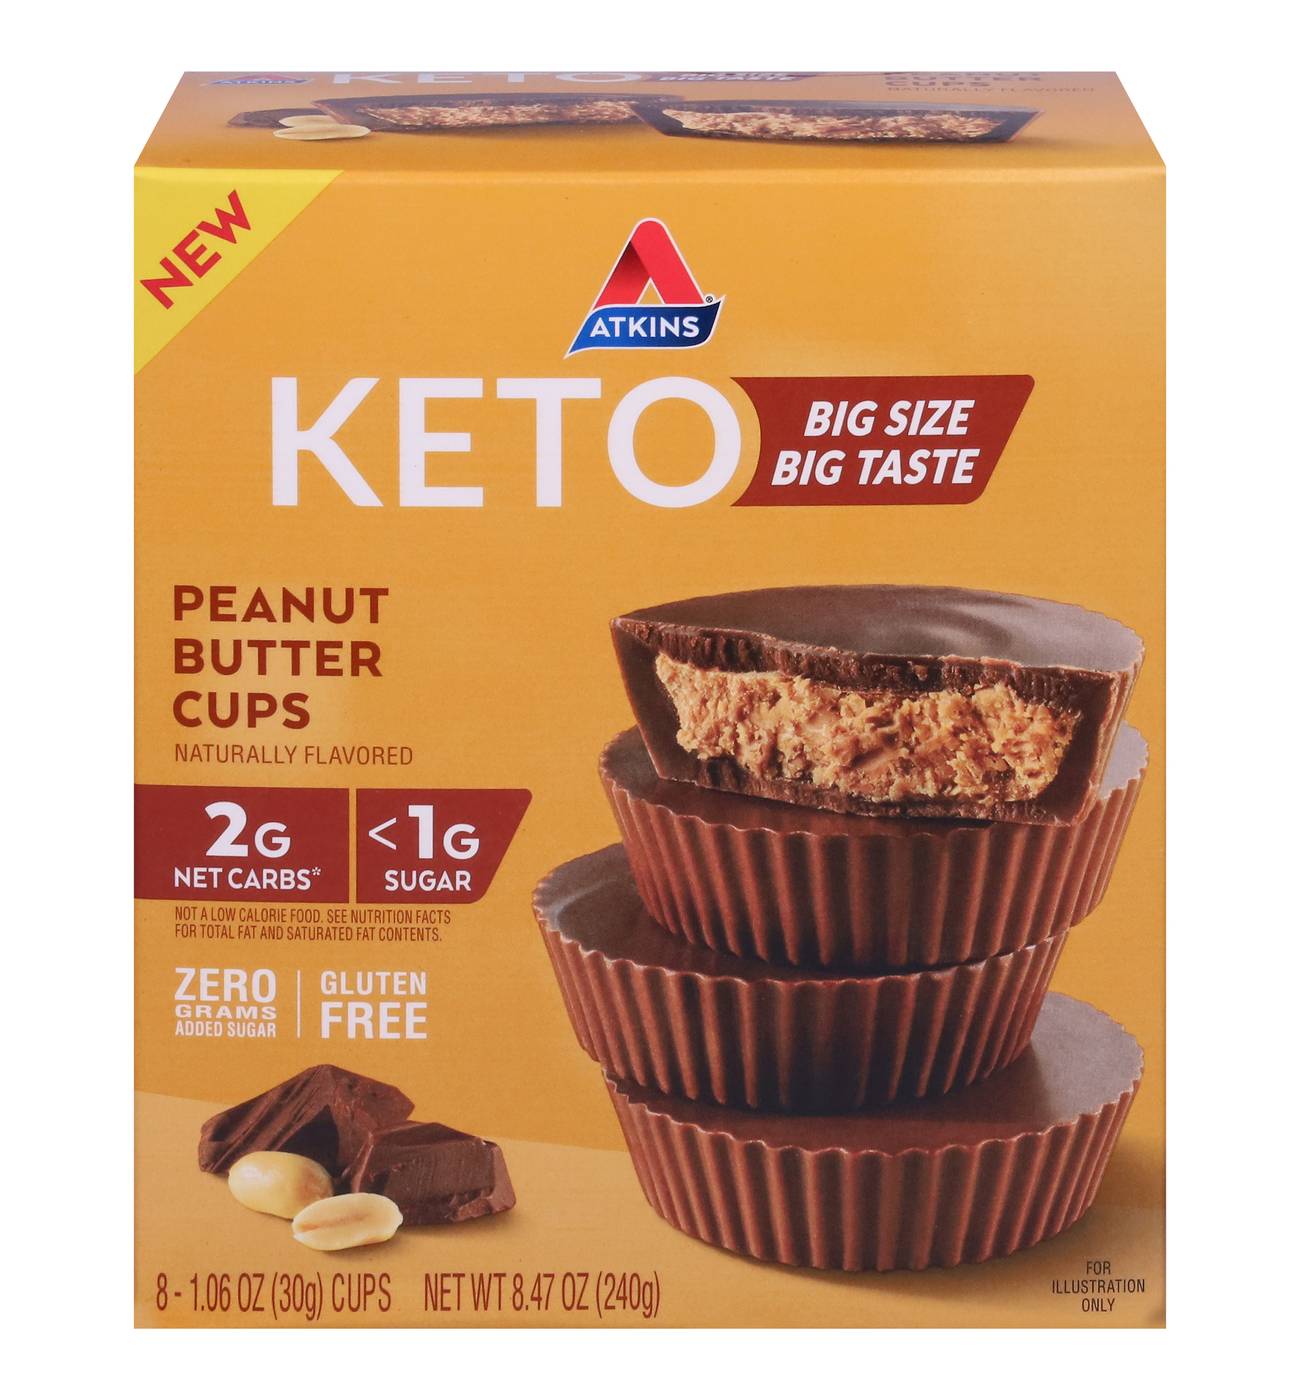 Atkins Keto Peanut Butter Cup; image 1 of 4